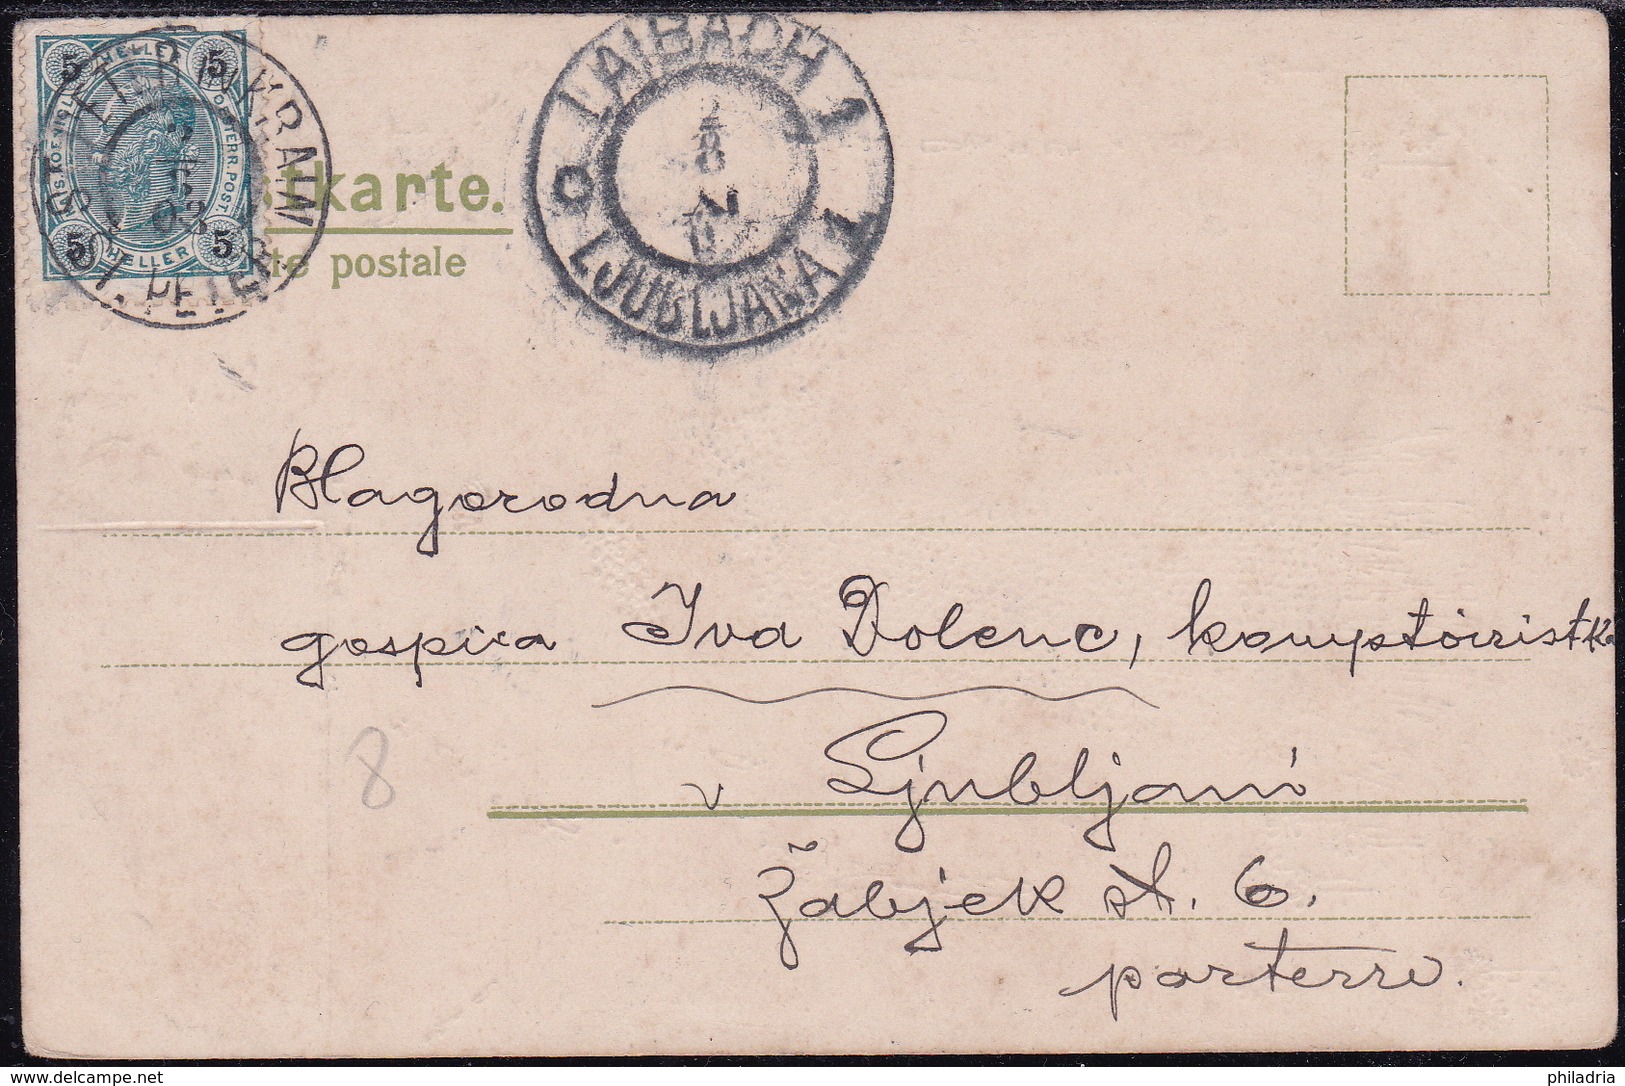 Alfred Mailick, Mailed 1903 Within Slovenia - Mailick, Alfred